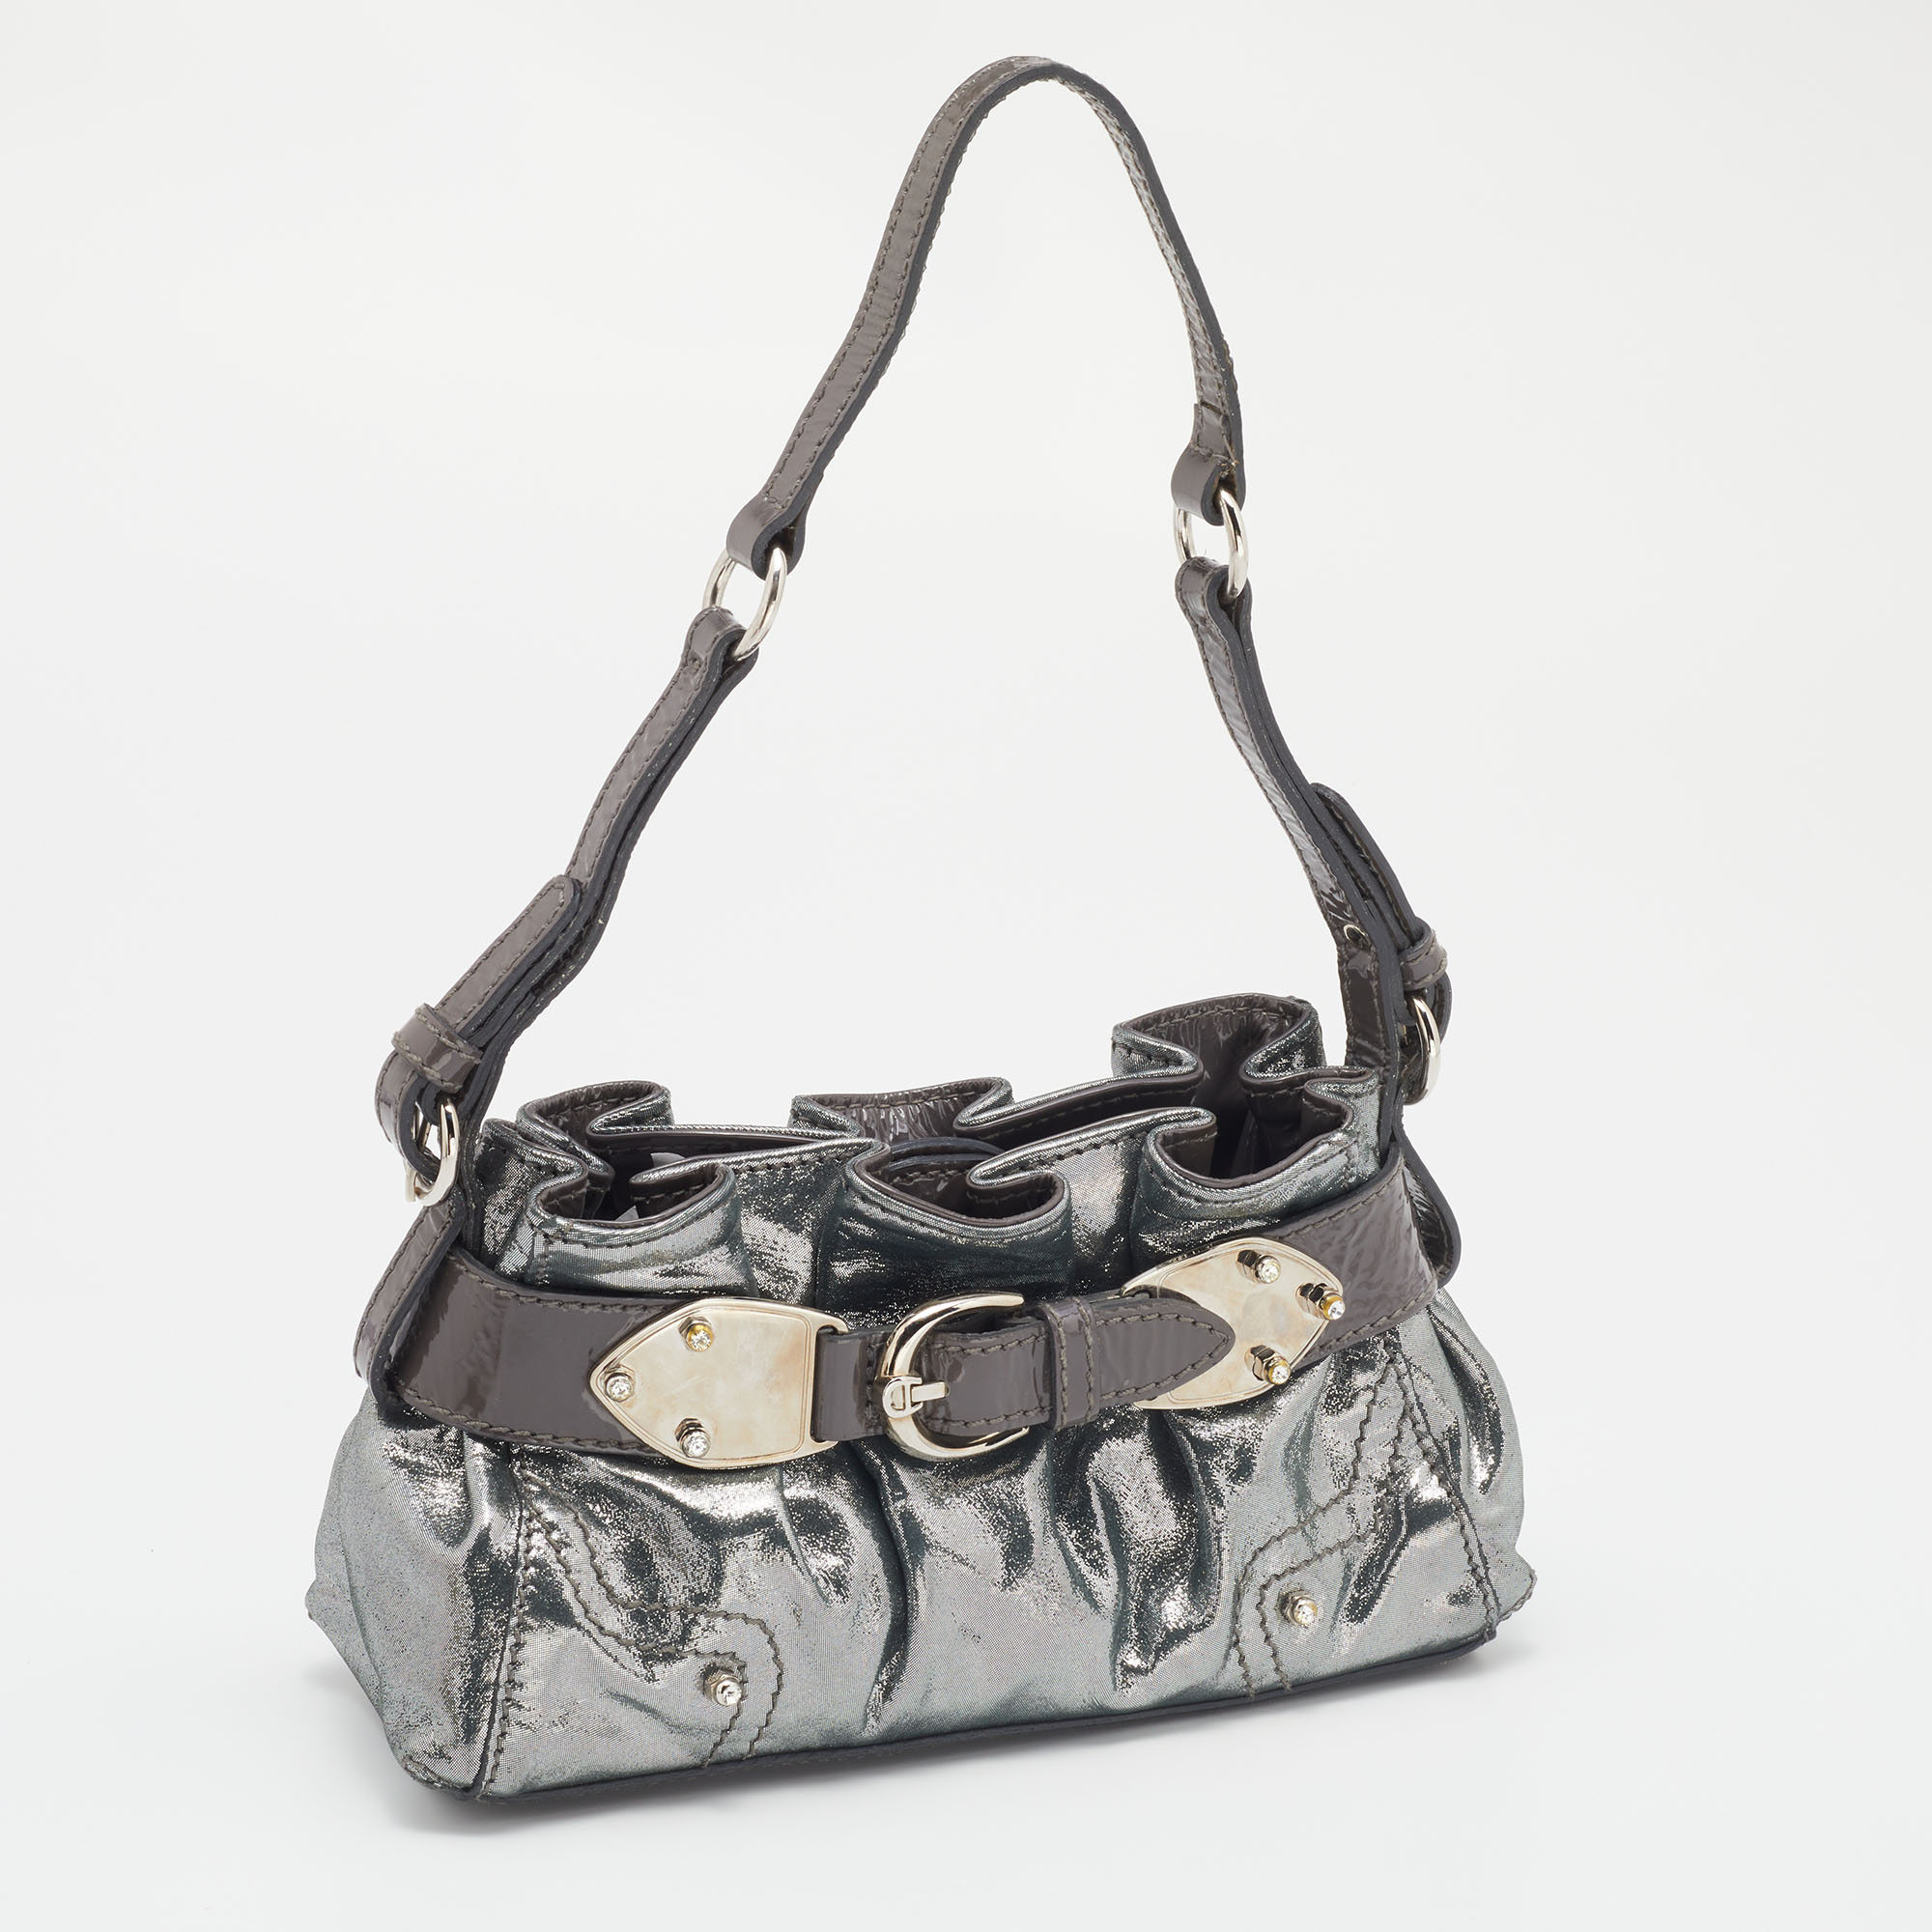 Aigner Metallic Grey Shimmering Patent And Leather Baguette Bag